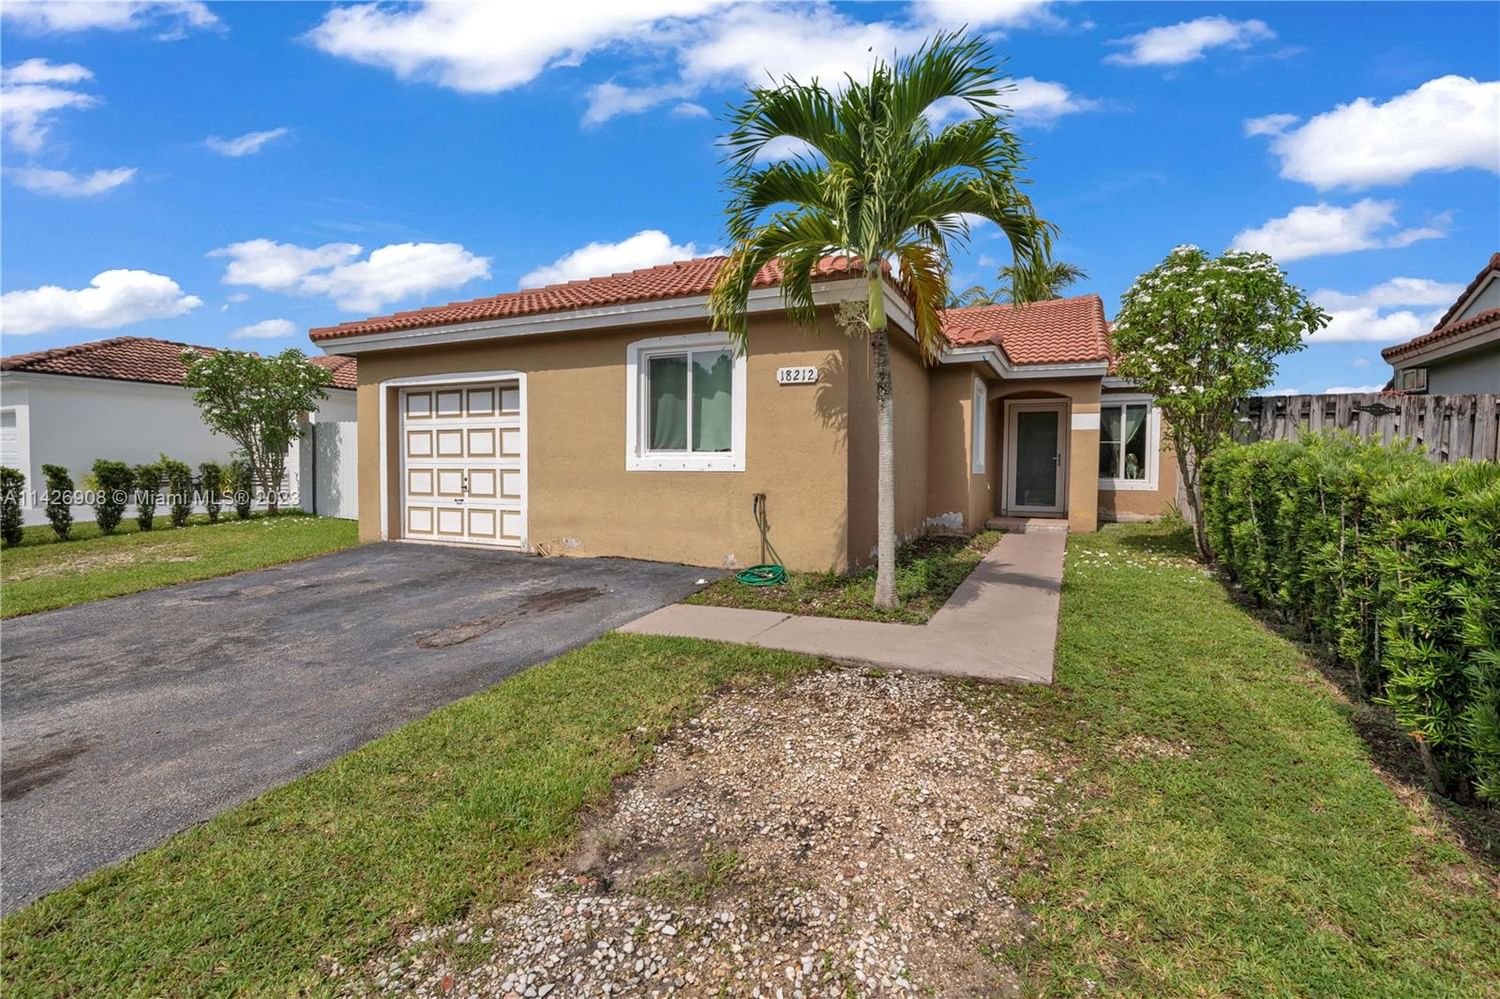 Real estate property located at 18212 142nd Ct, Miami-Dade County, Miami, FL